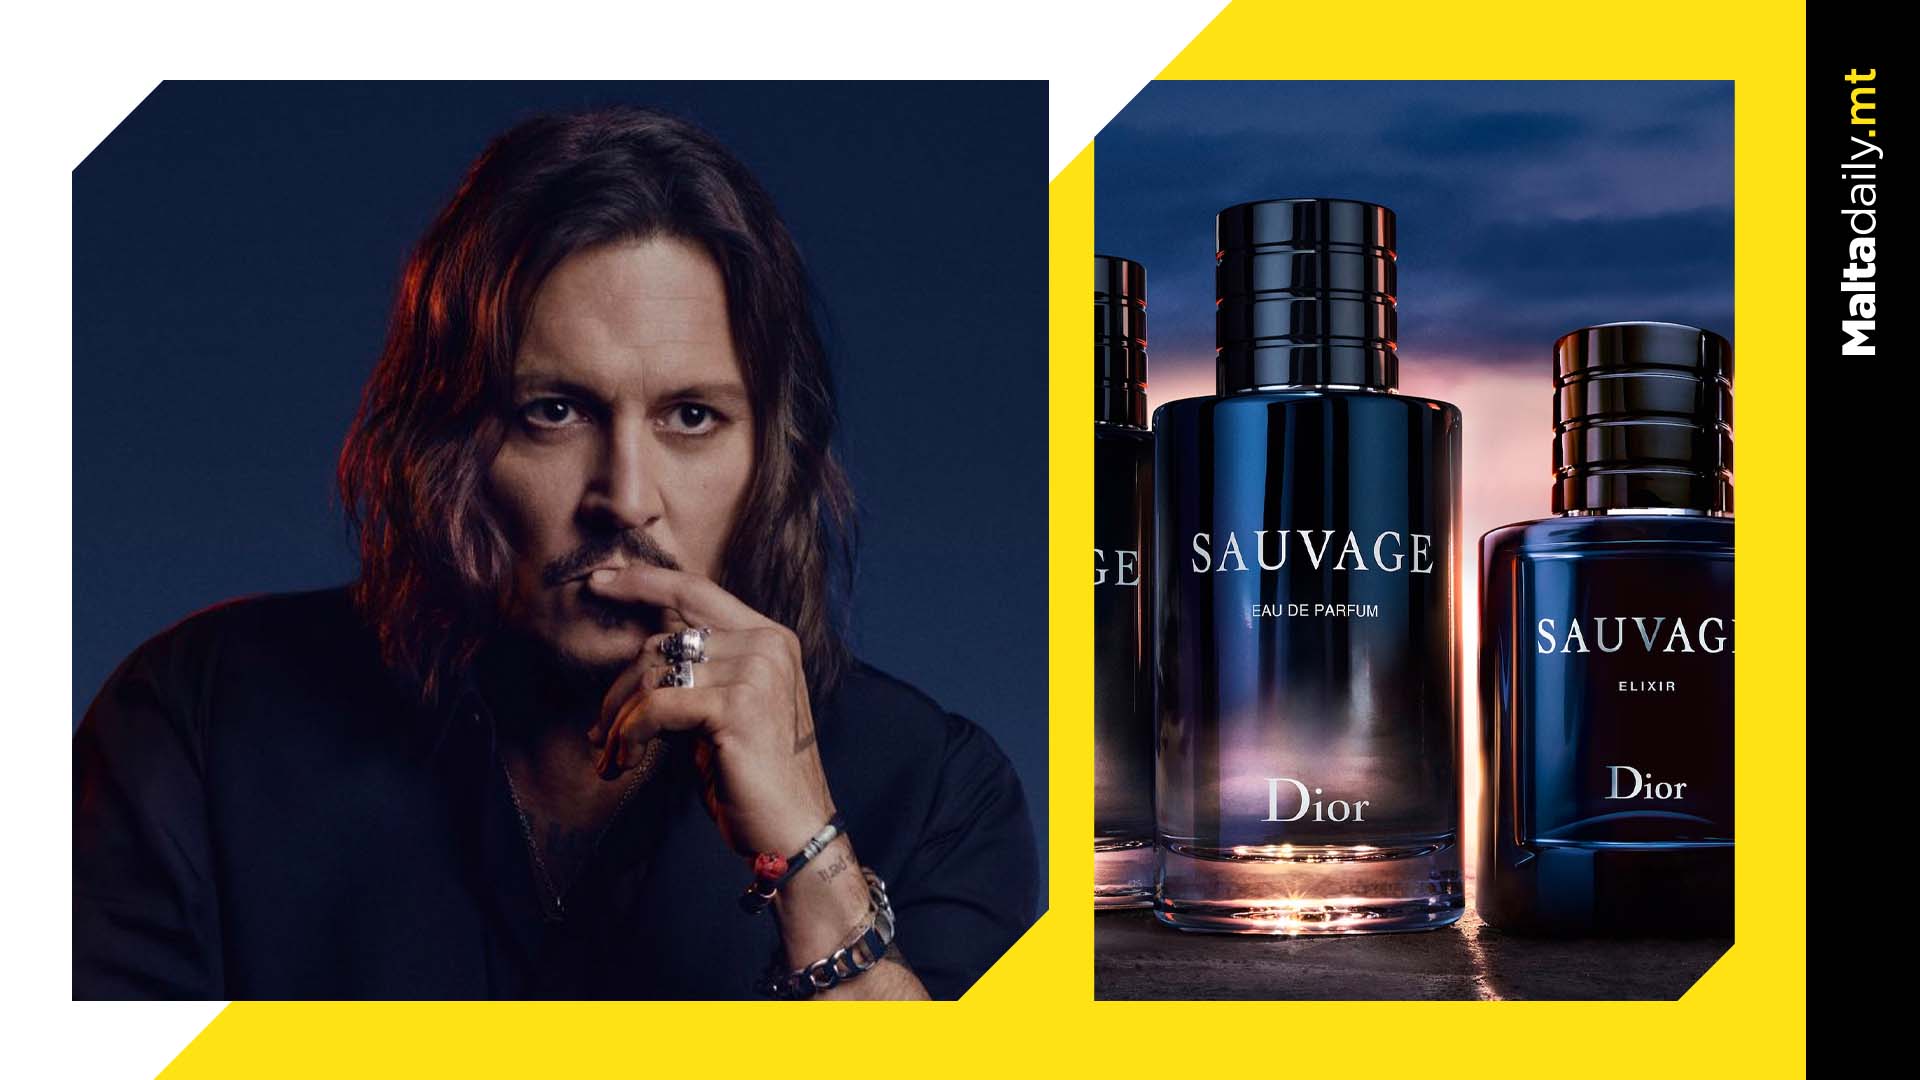 Johnny Depp Made $20 Million To Be Face Of Sauvage